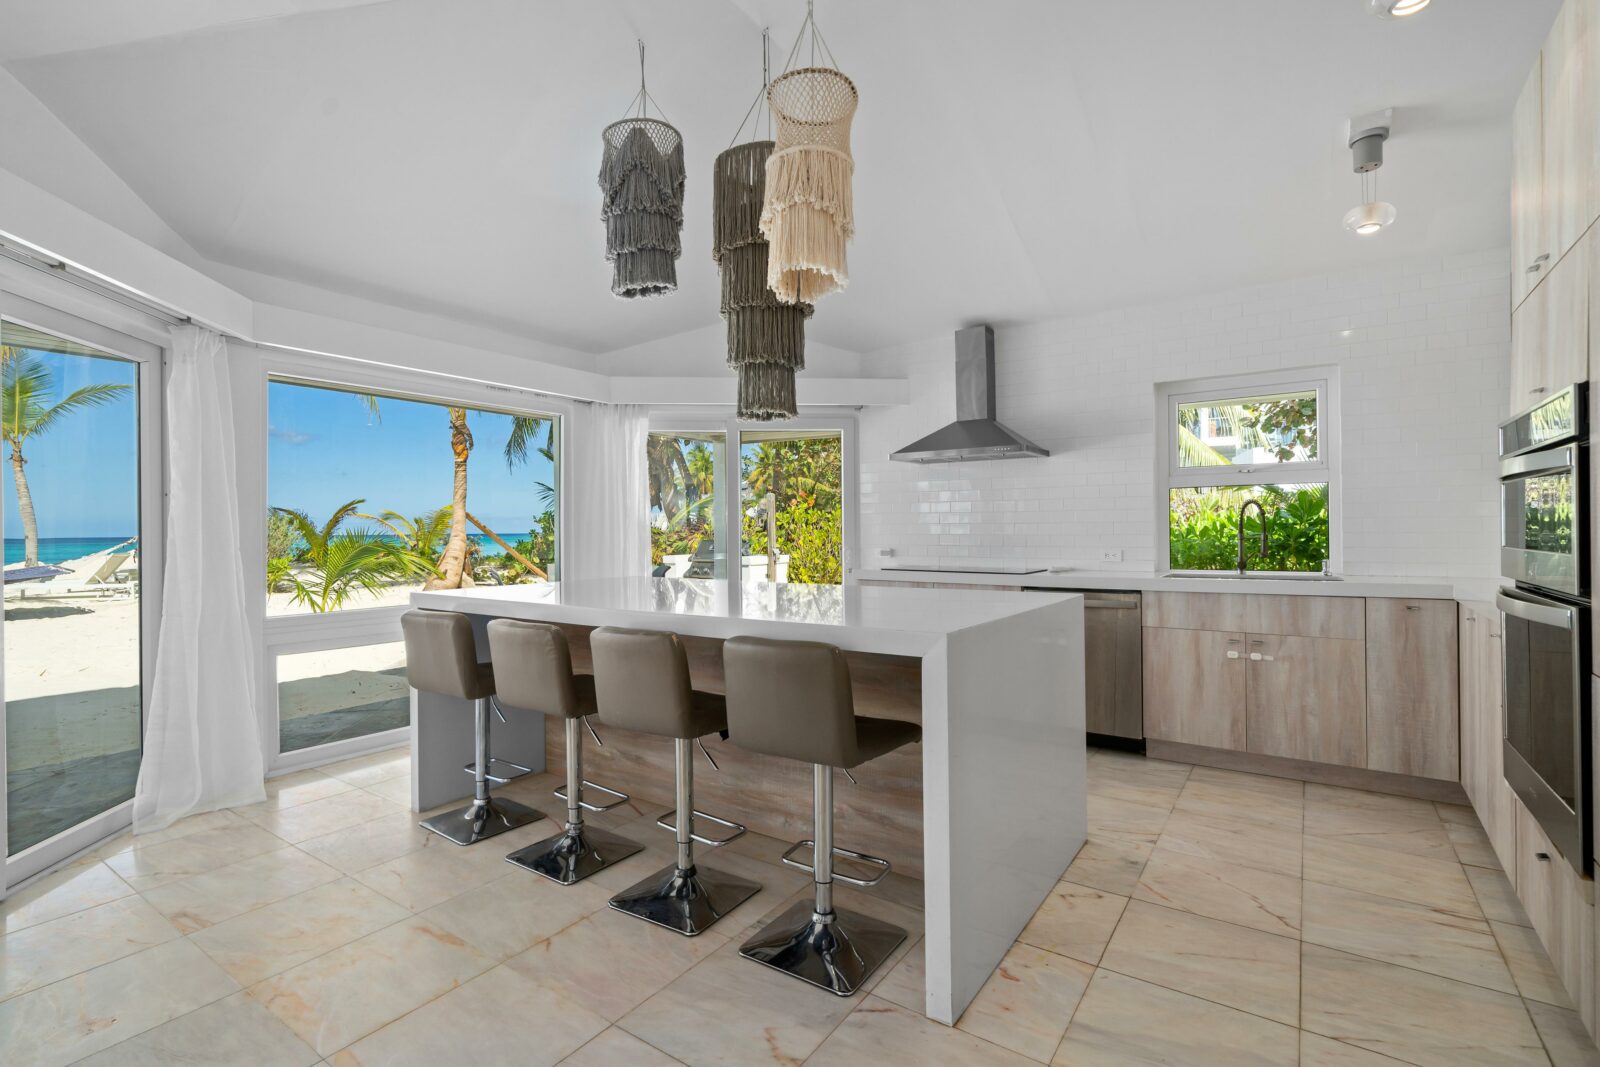 Renovated modern kitchen inside a beachfront home in The Bahamas